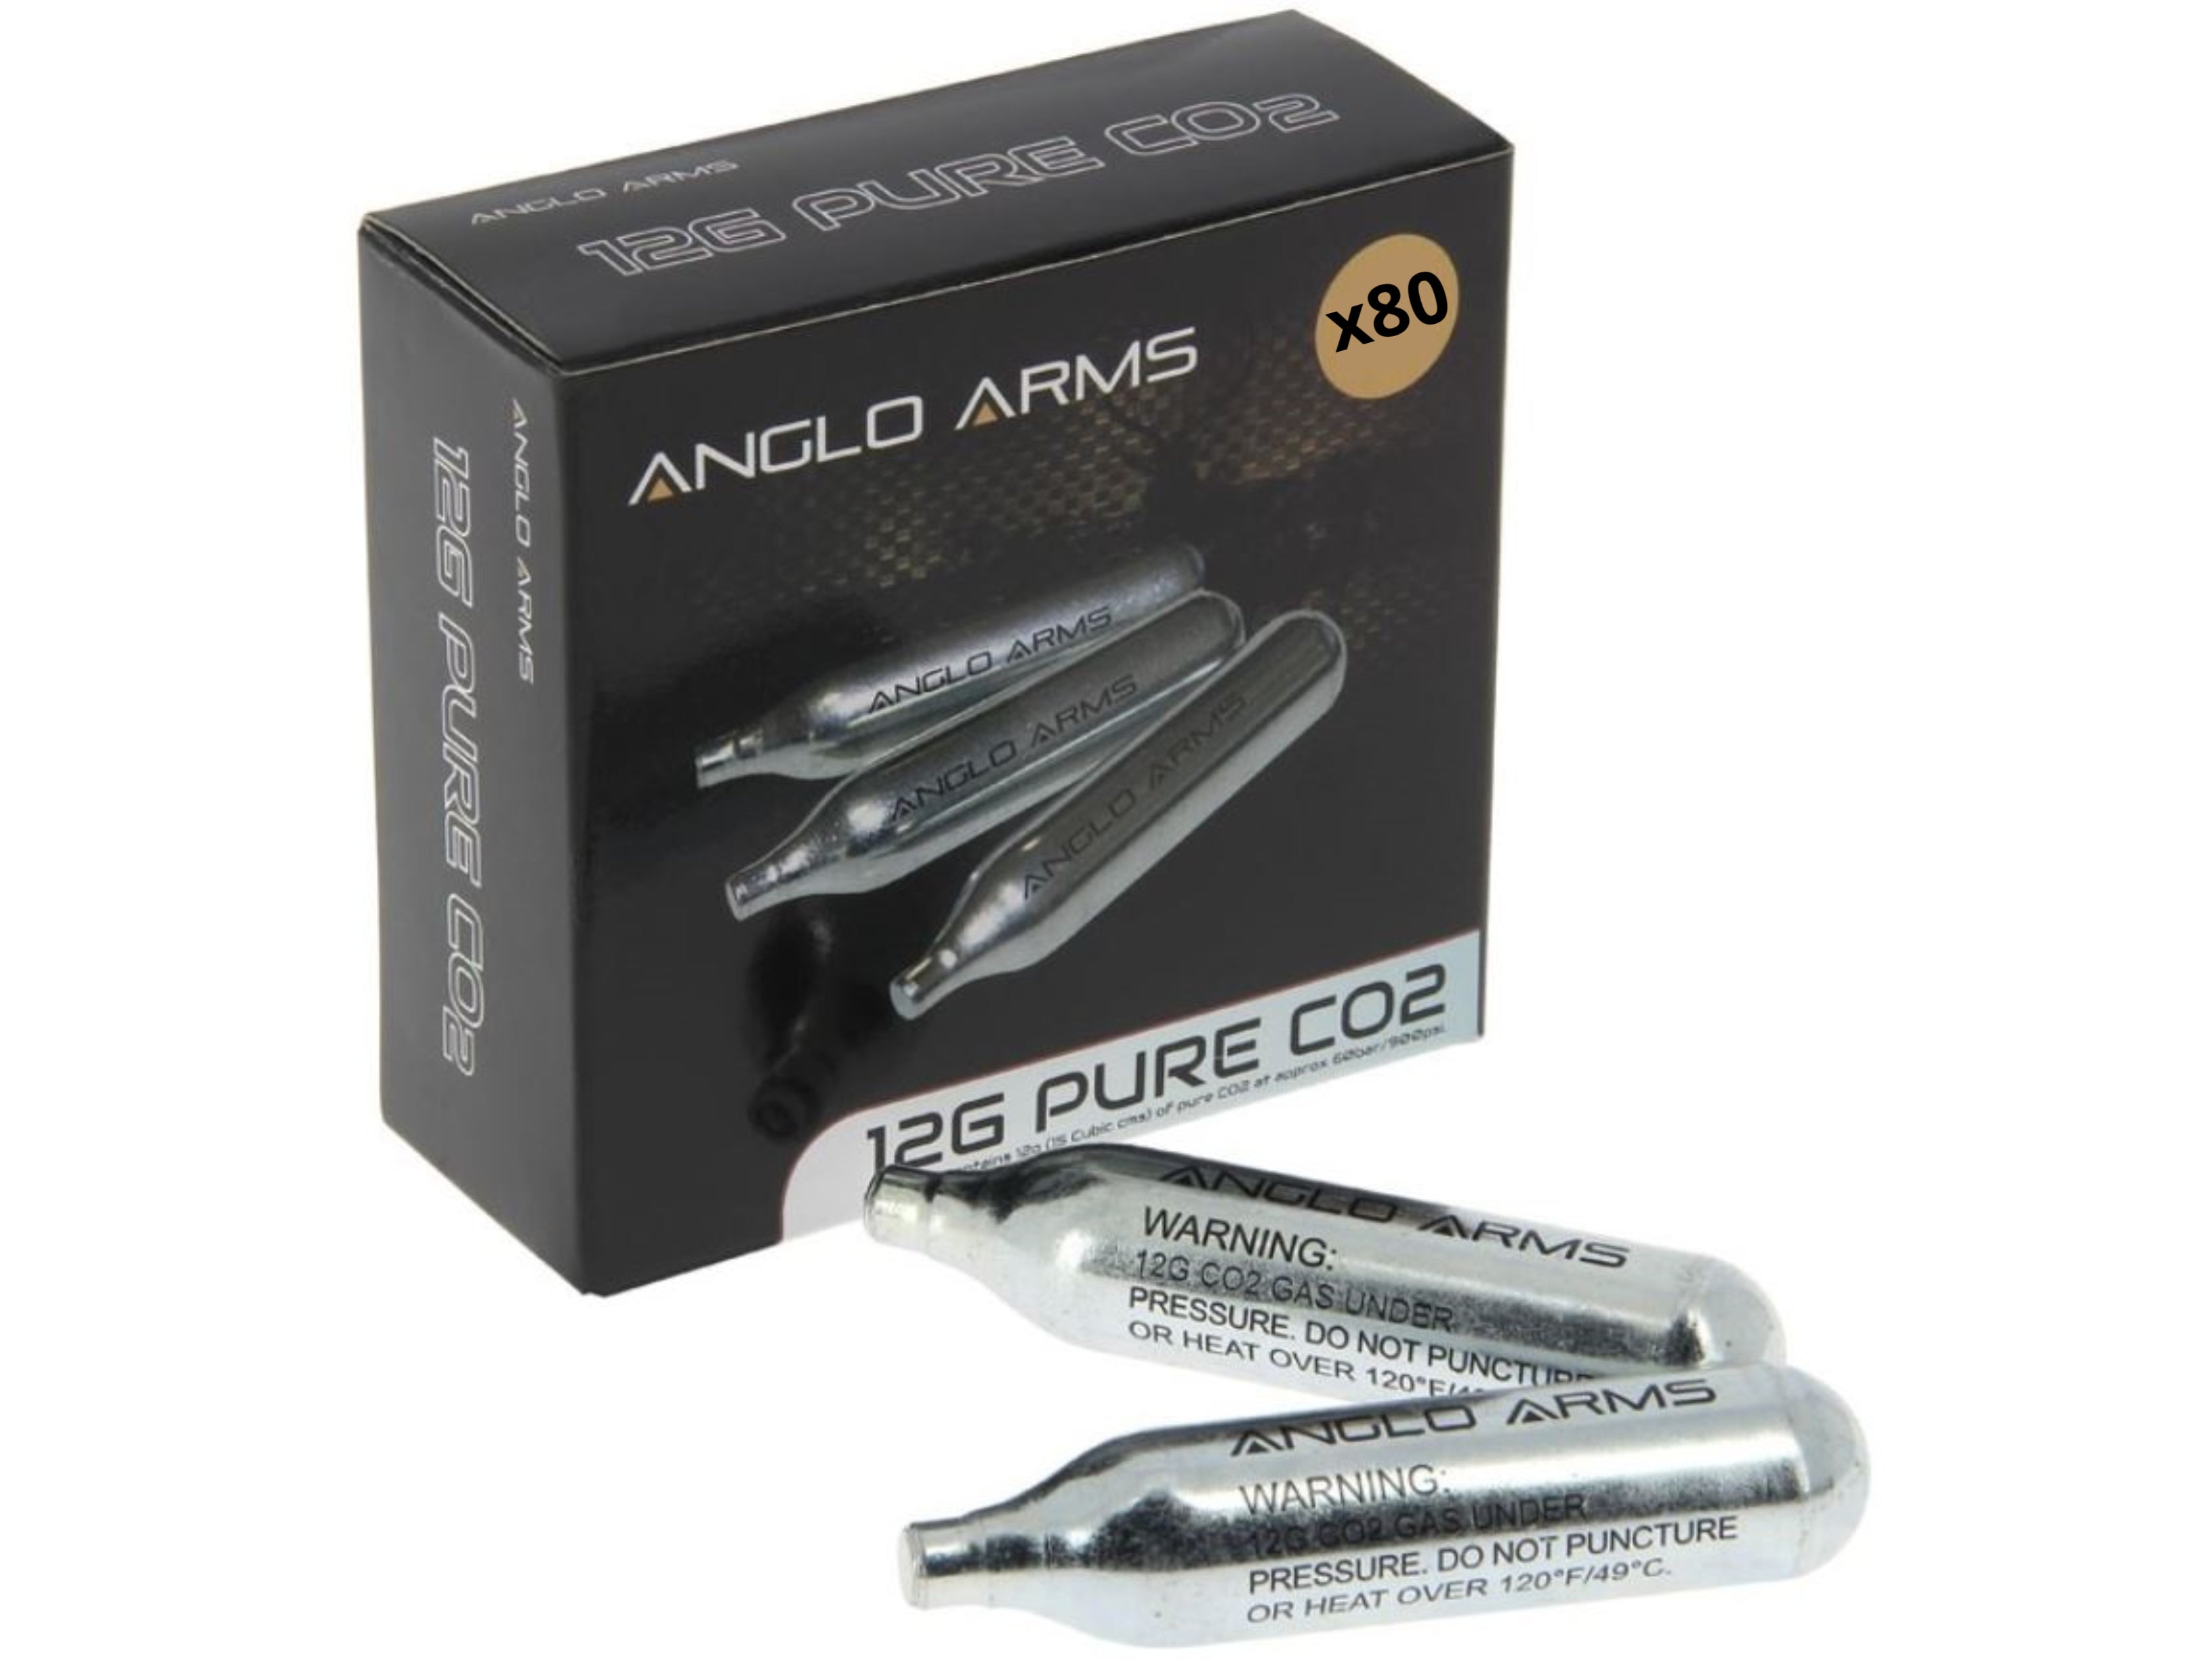 ANGLO ARMS 80 X ANGLO ARMS 12G GRAM CO2 CAPSULE CARTRIDGE SET